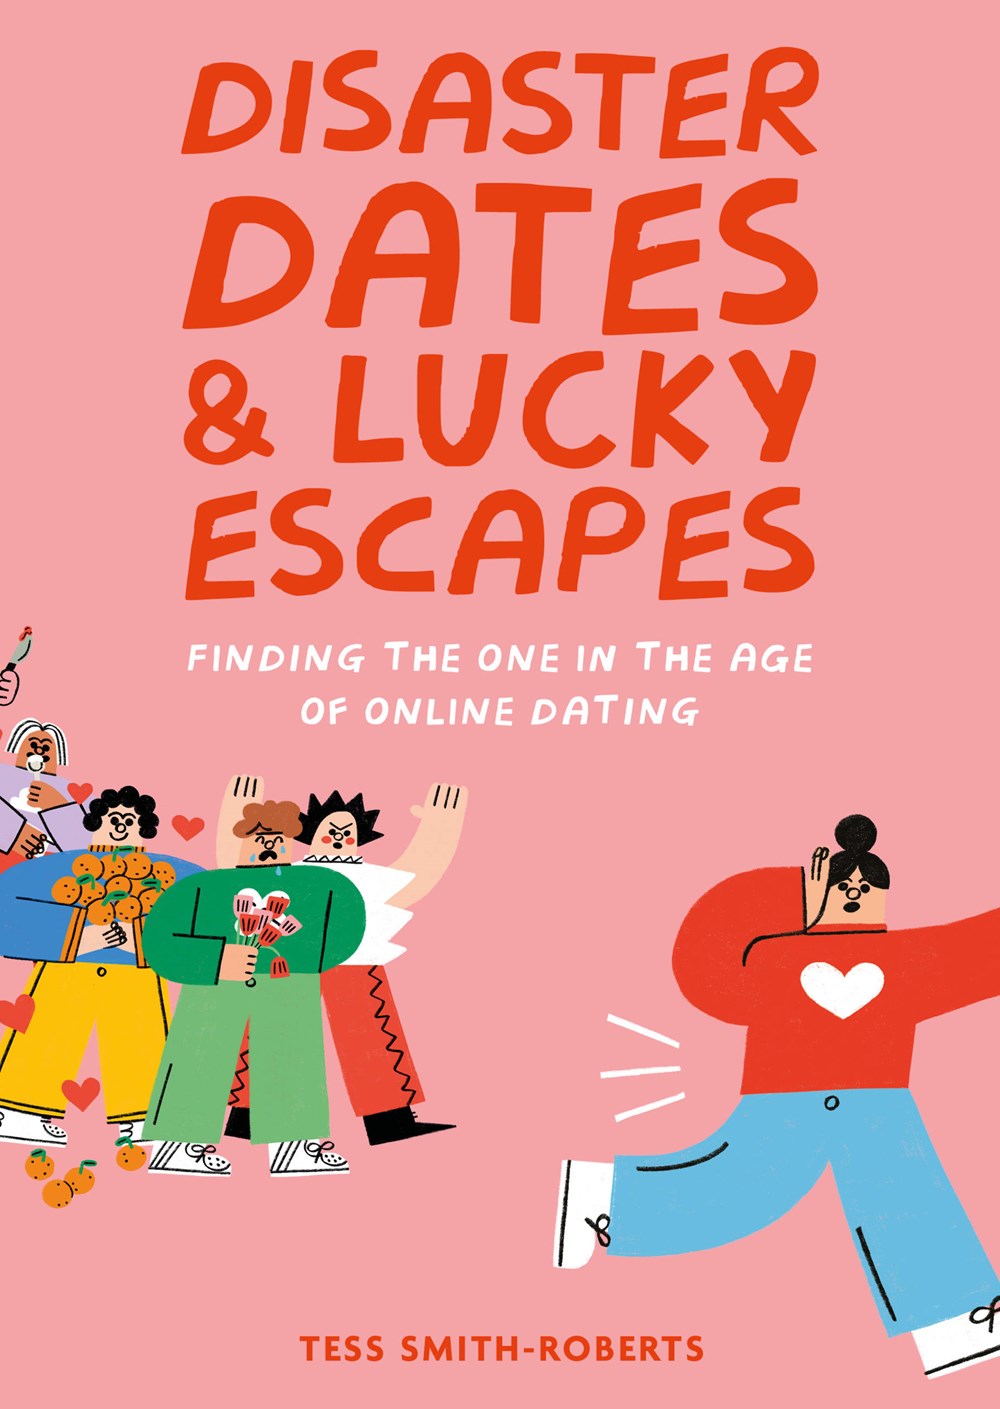 Disaster Dates & Lucky Escapes by Tess Smith-Roberts